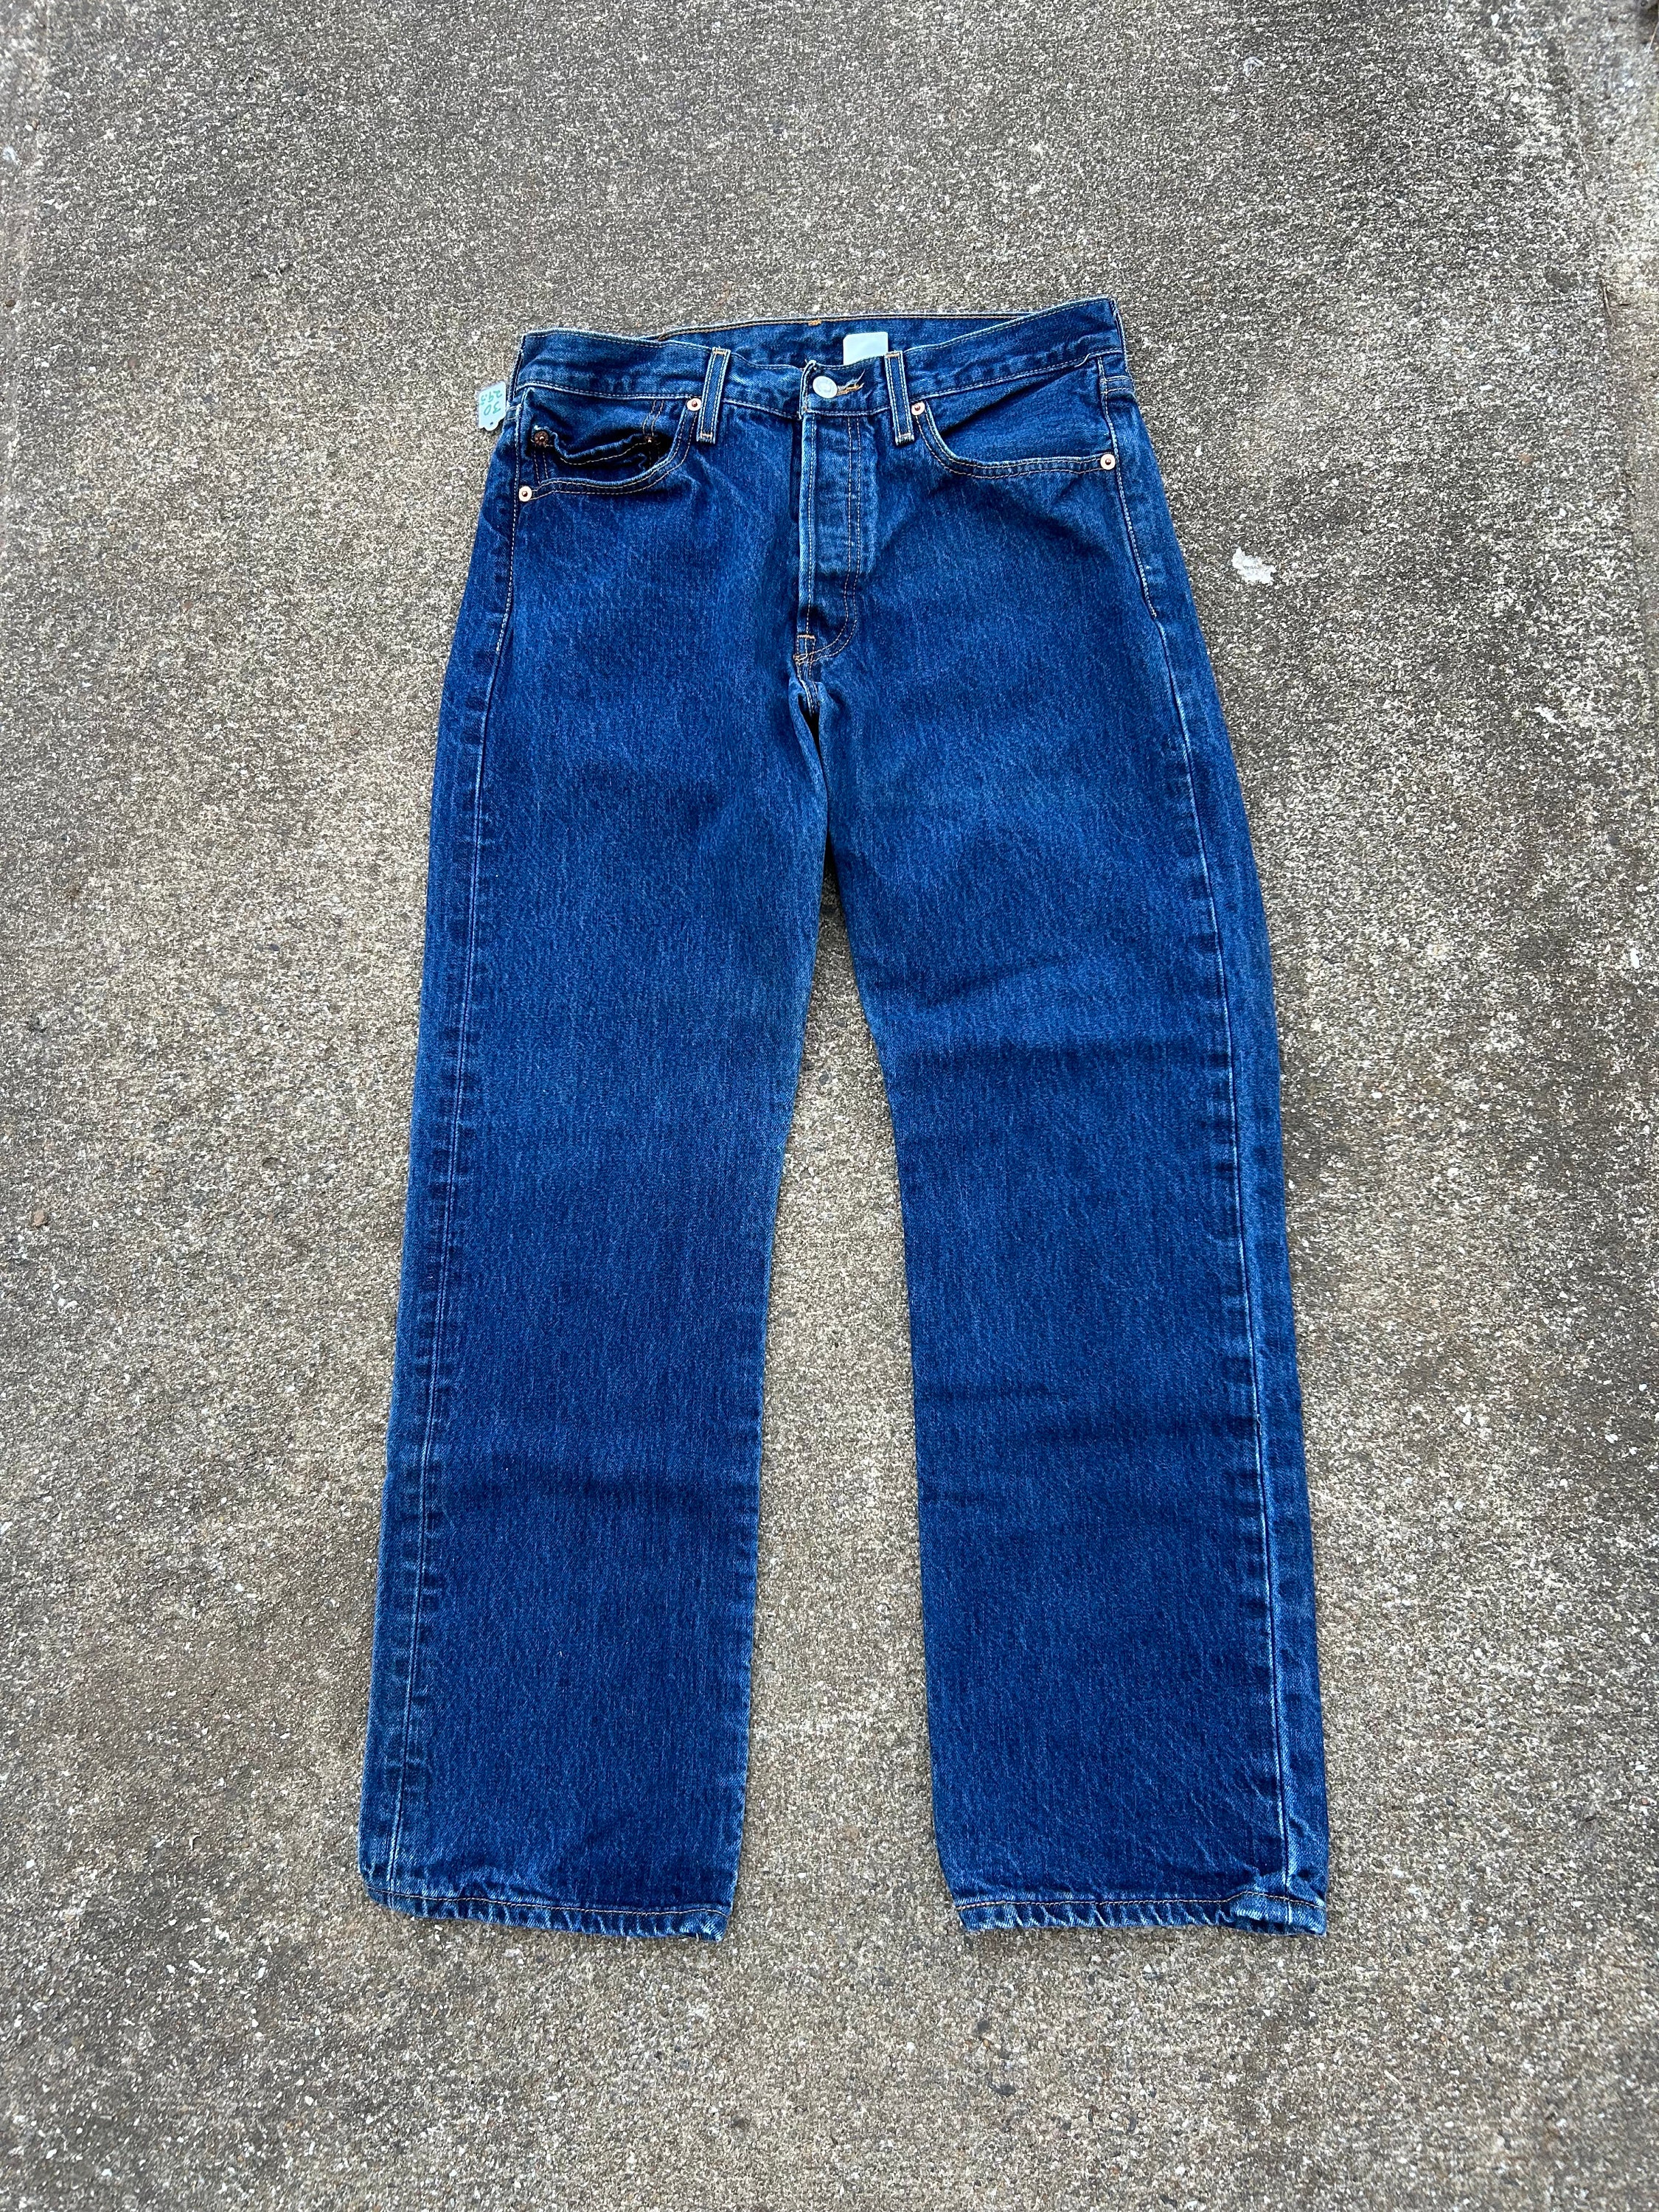 Womens Jeans 30x30 